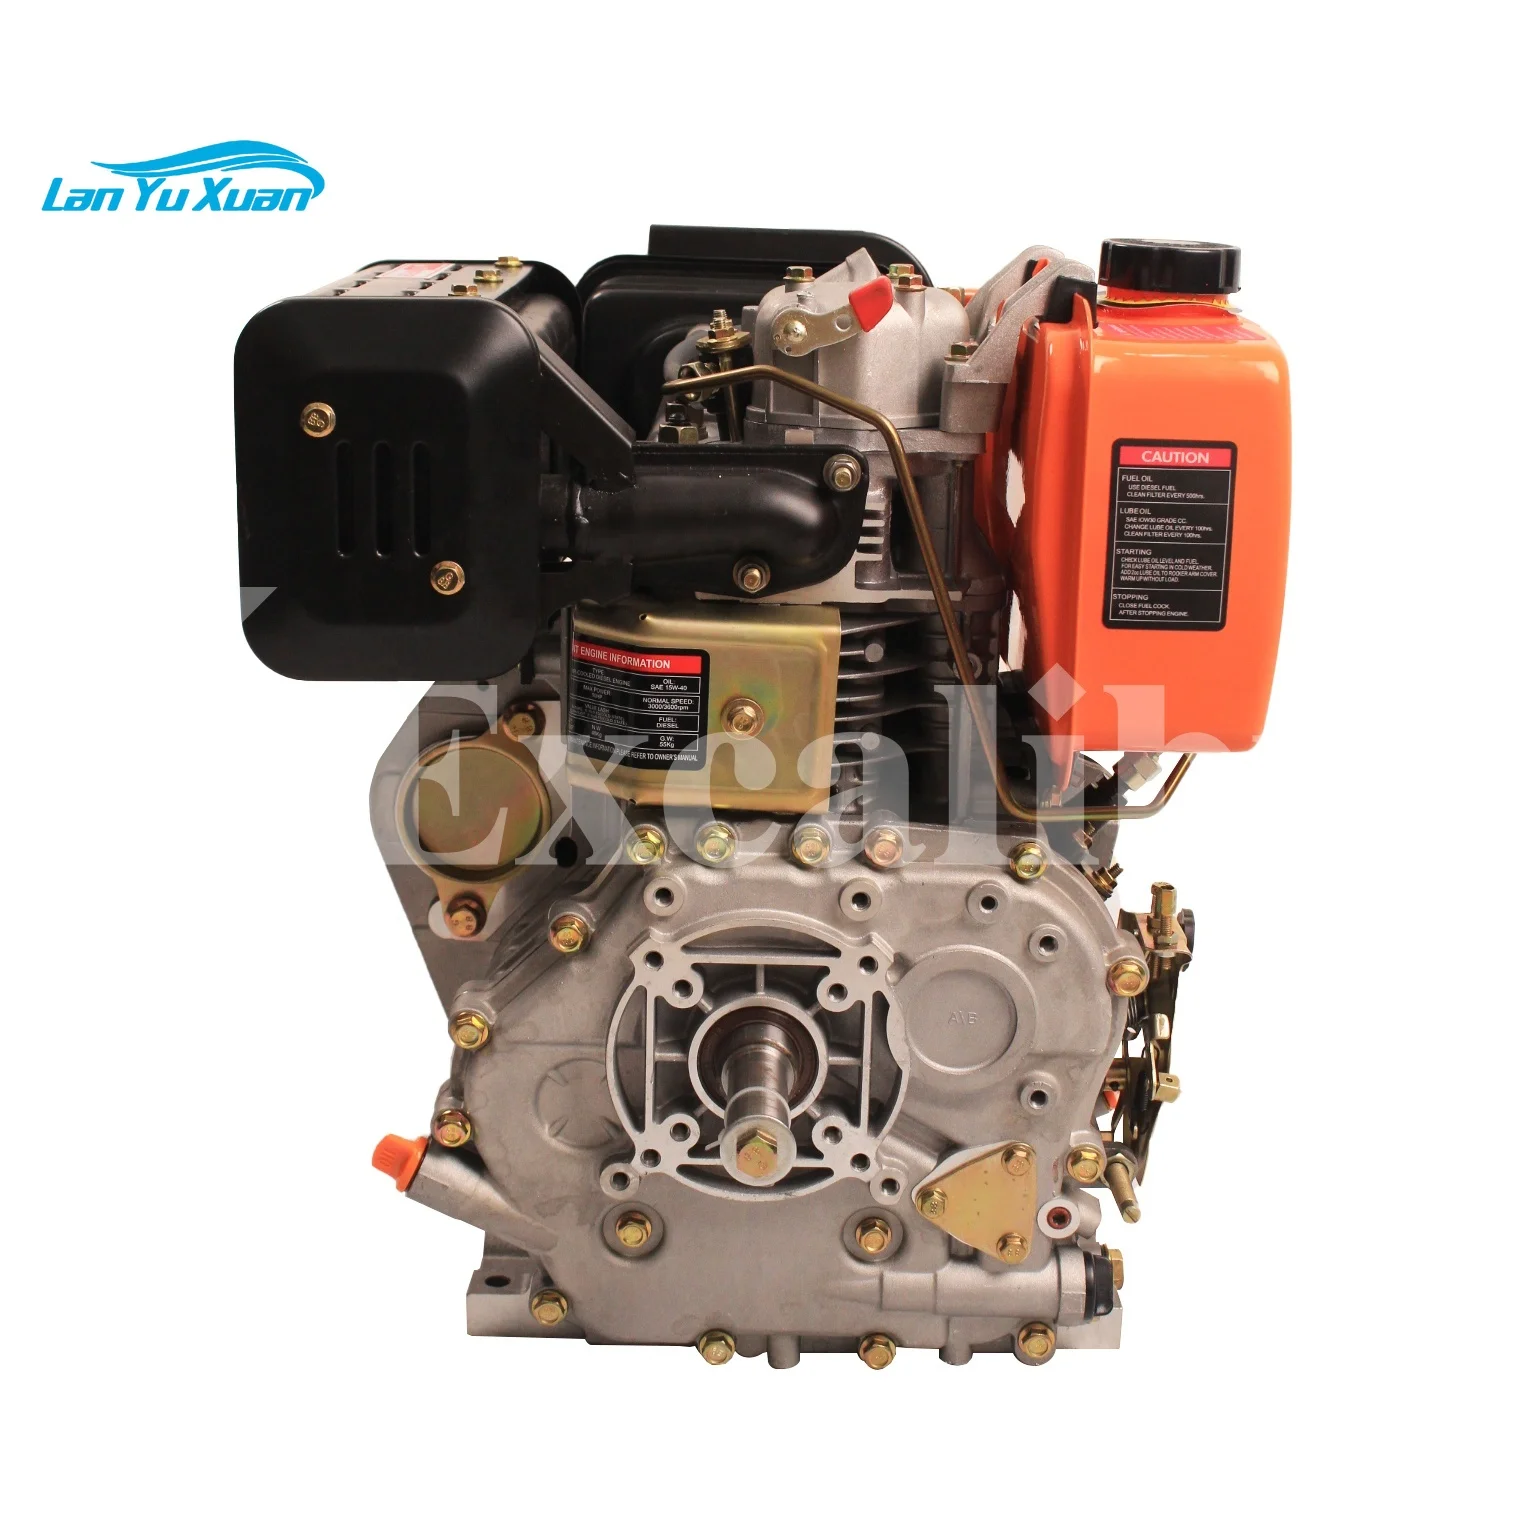 

Electric Start Air Cooling Engine Start Engine S192FE 12 195 Engine For Sale